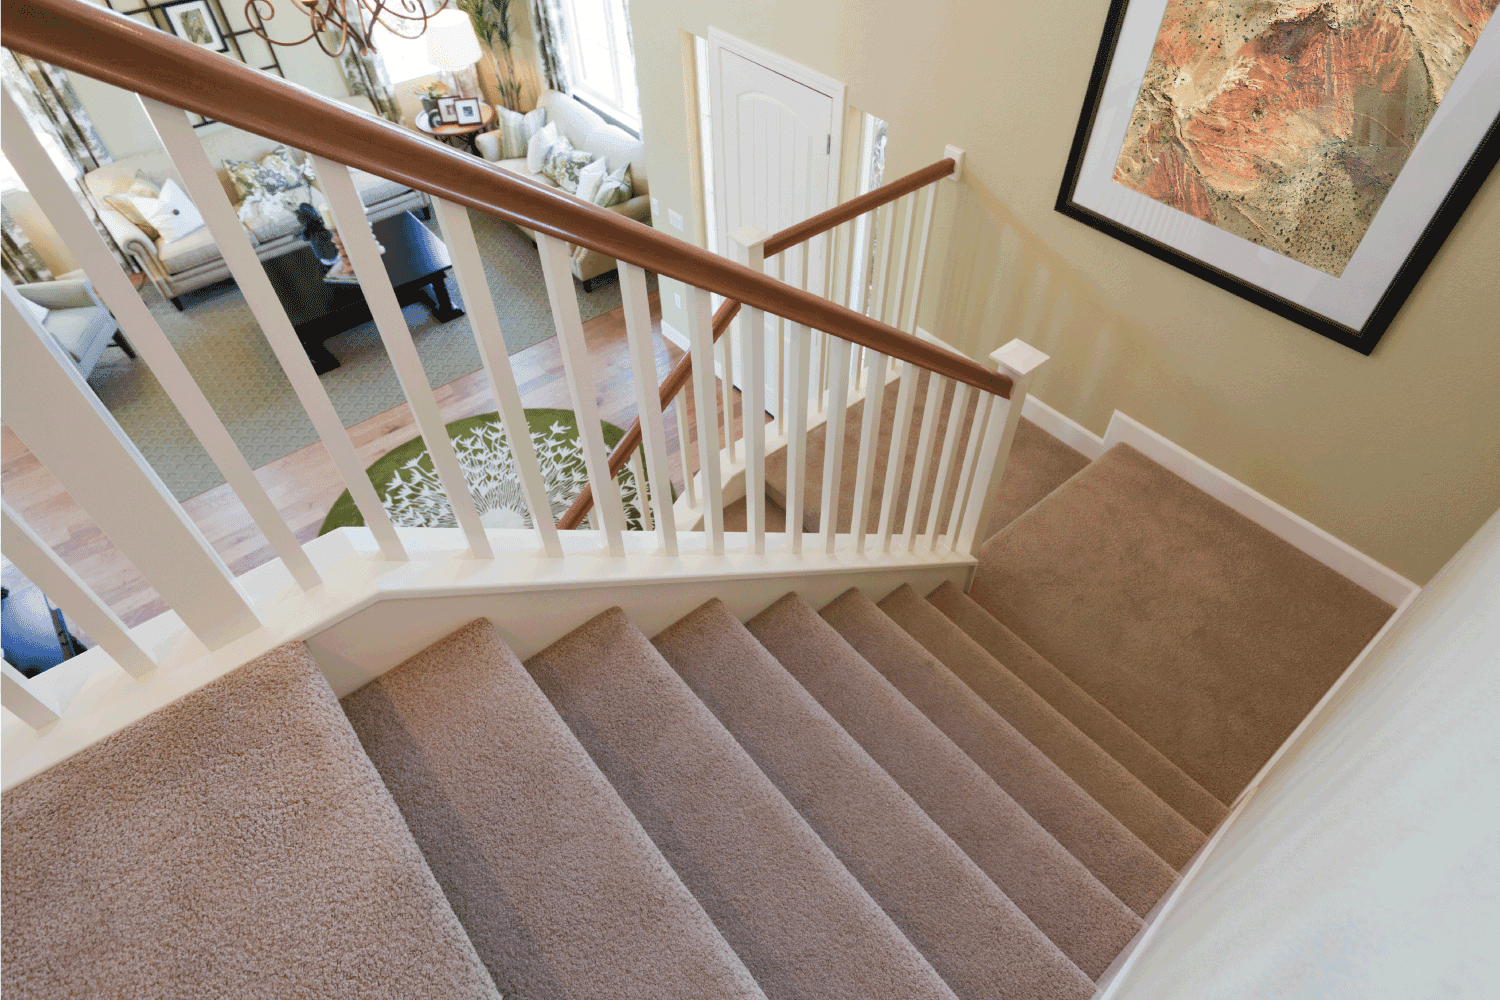 View down interior carpeted stairs in a modern American home.